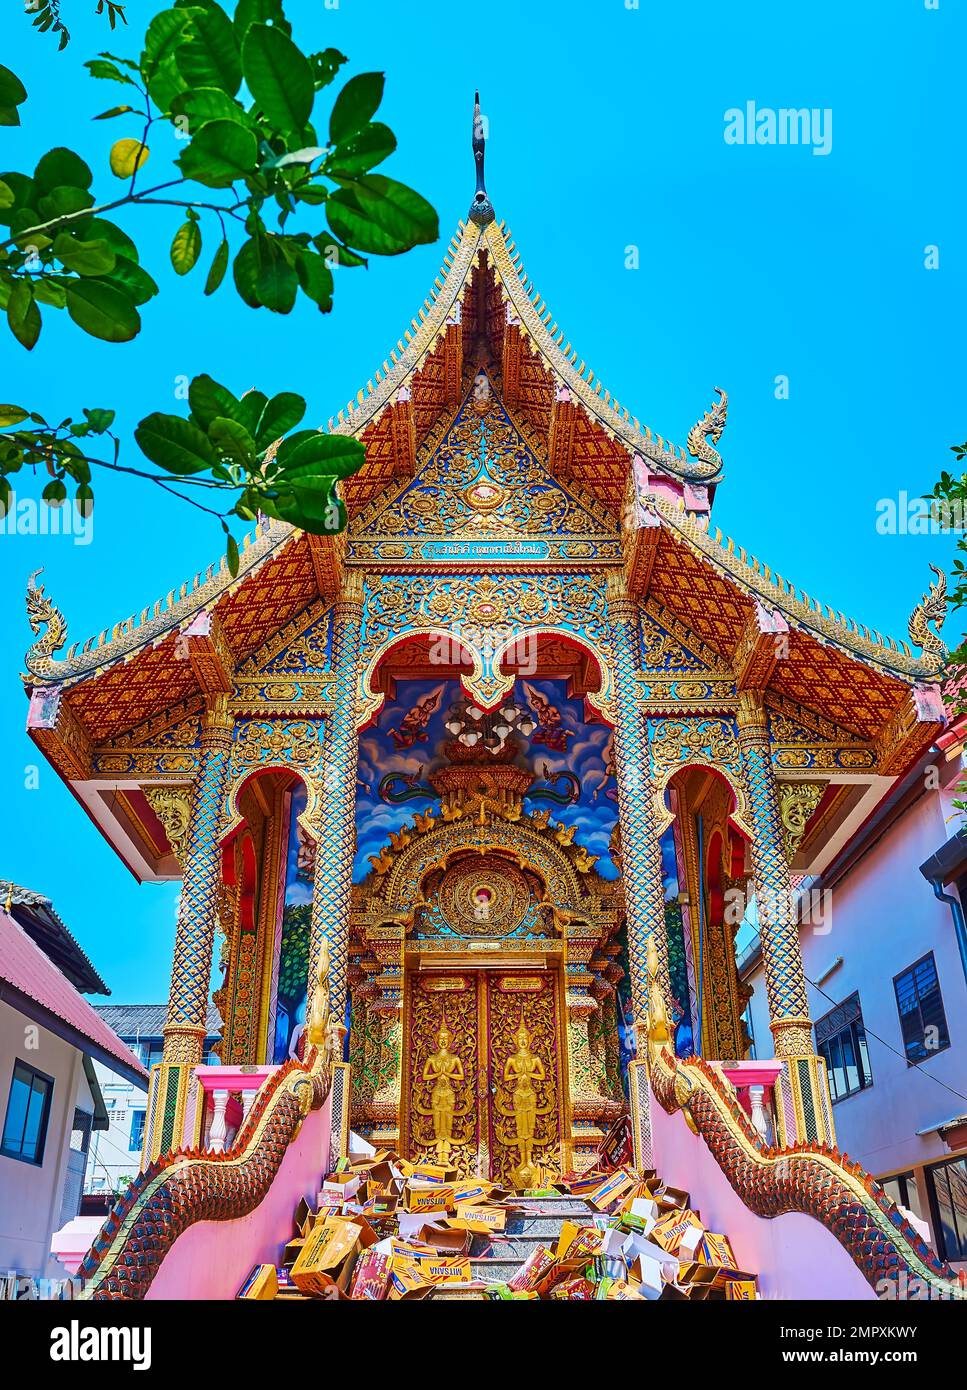 CHIANG MAI, THAILAND - MAY 3, 2019: Ornate exterior of the Ubosot of Wat Dap Phai with Naga statues, Devata deitises on the doors, colored murals on w Stock Photo